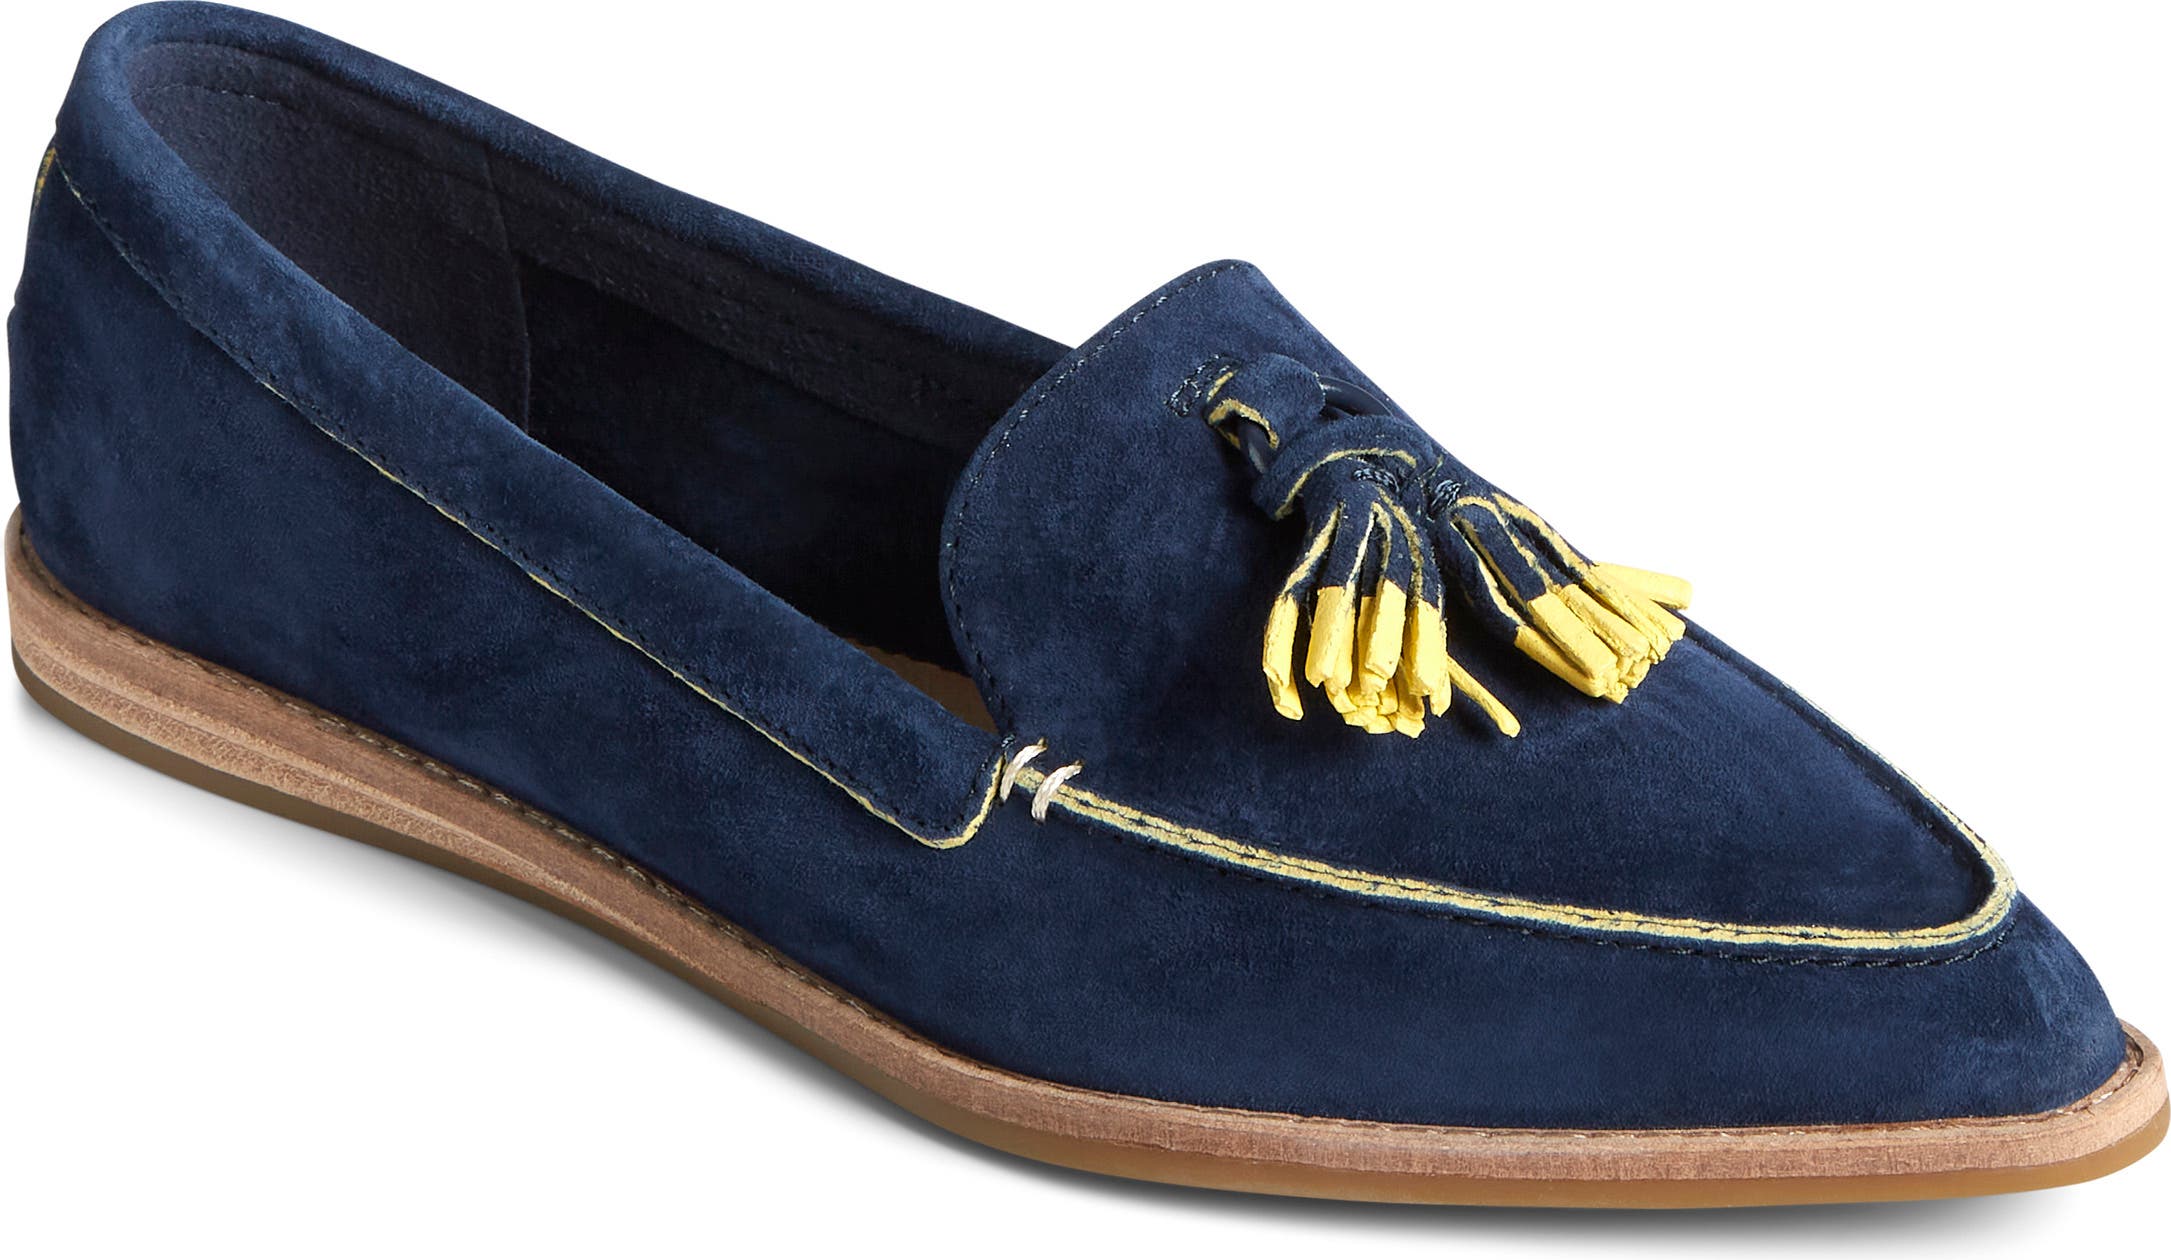 Van Dal Minni Midnight Leather Loafer Shoes E